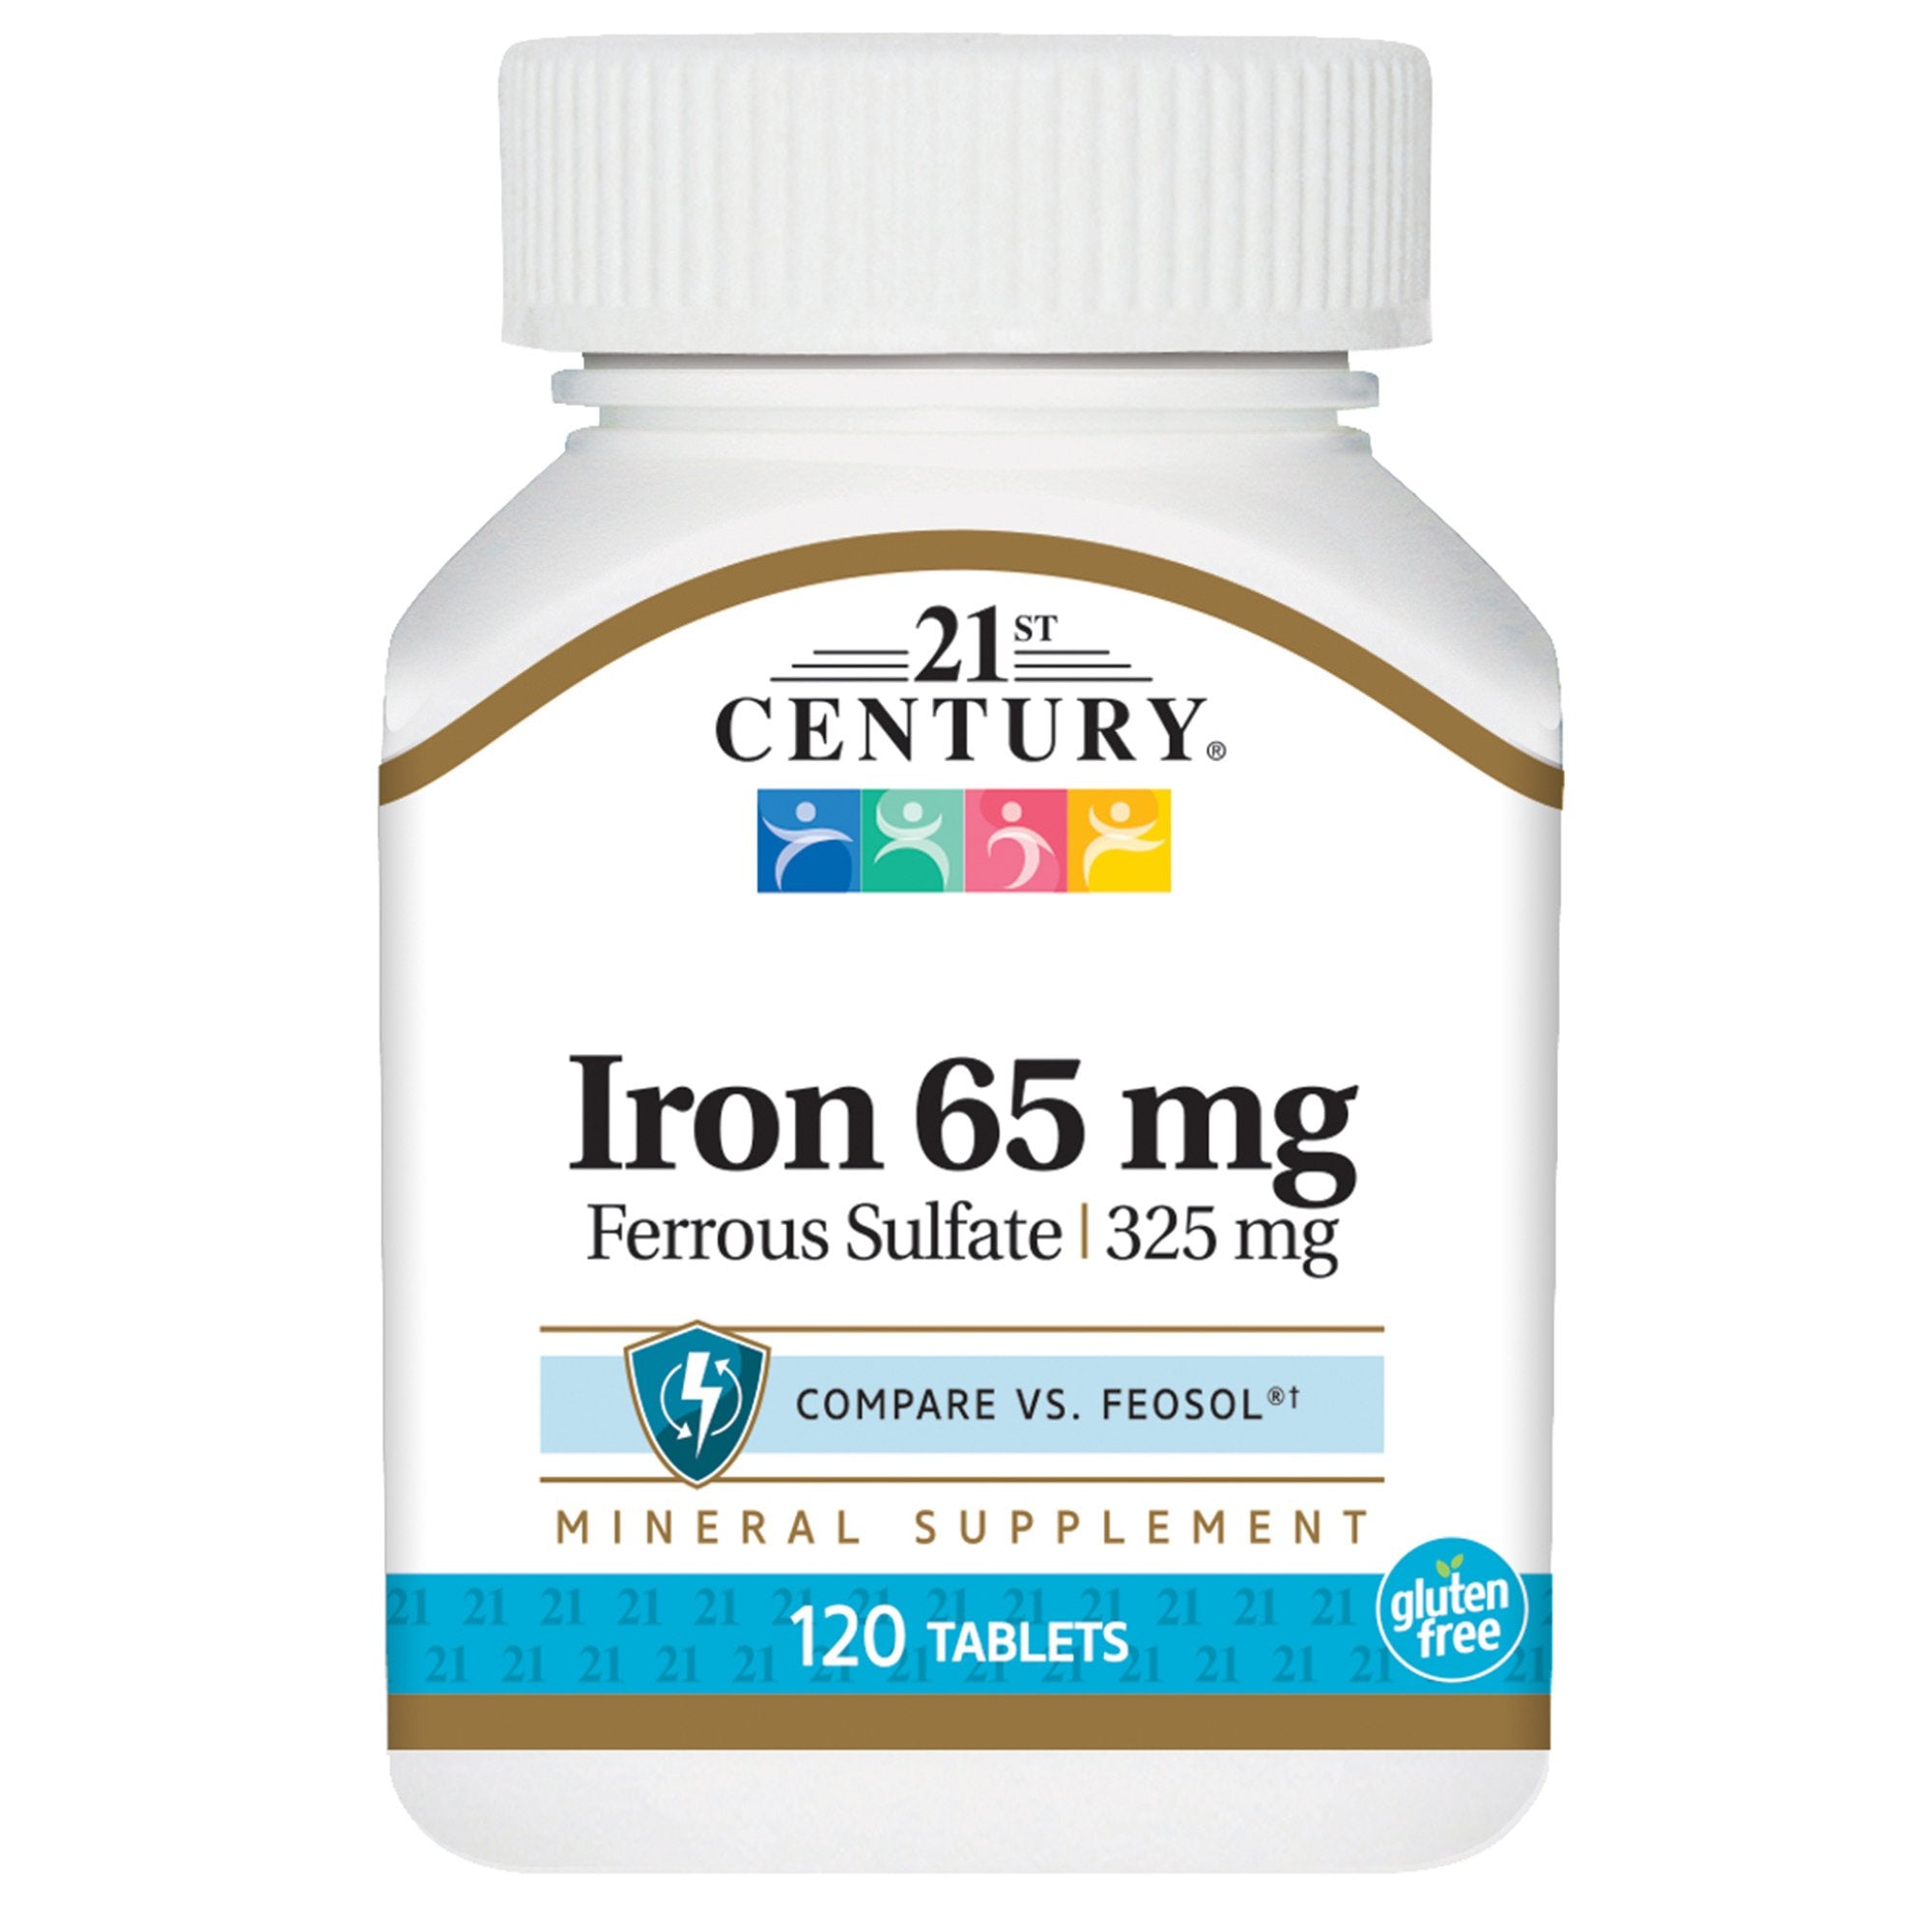 21st Century Iron 65 Mg Ferrous Sulfate 325 Mg Tablets, 120 Count (Pack of 2)